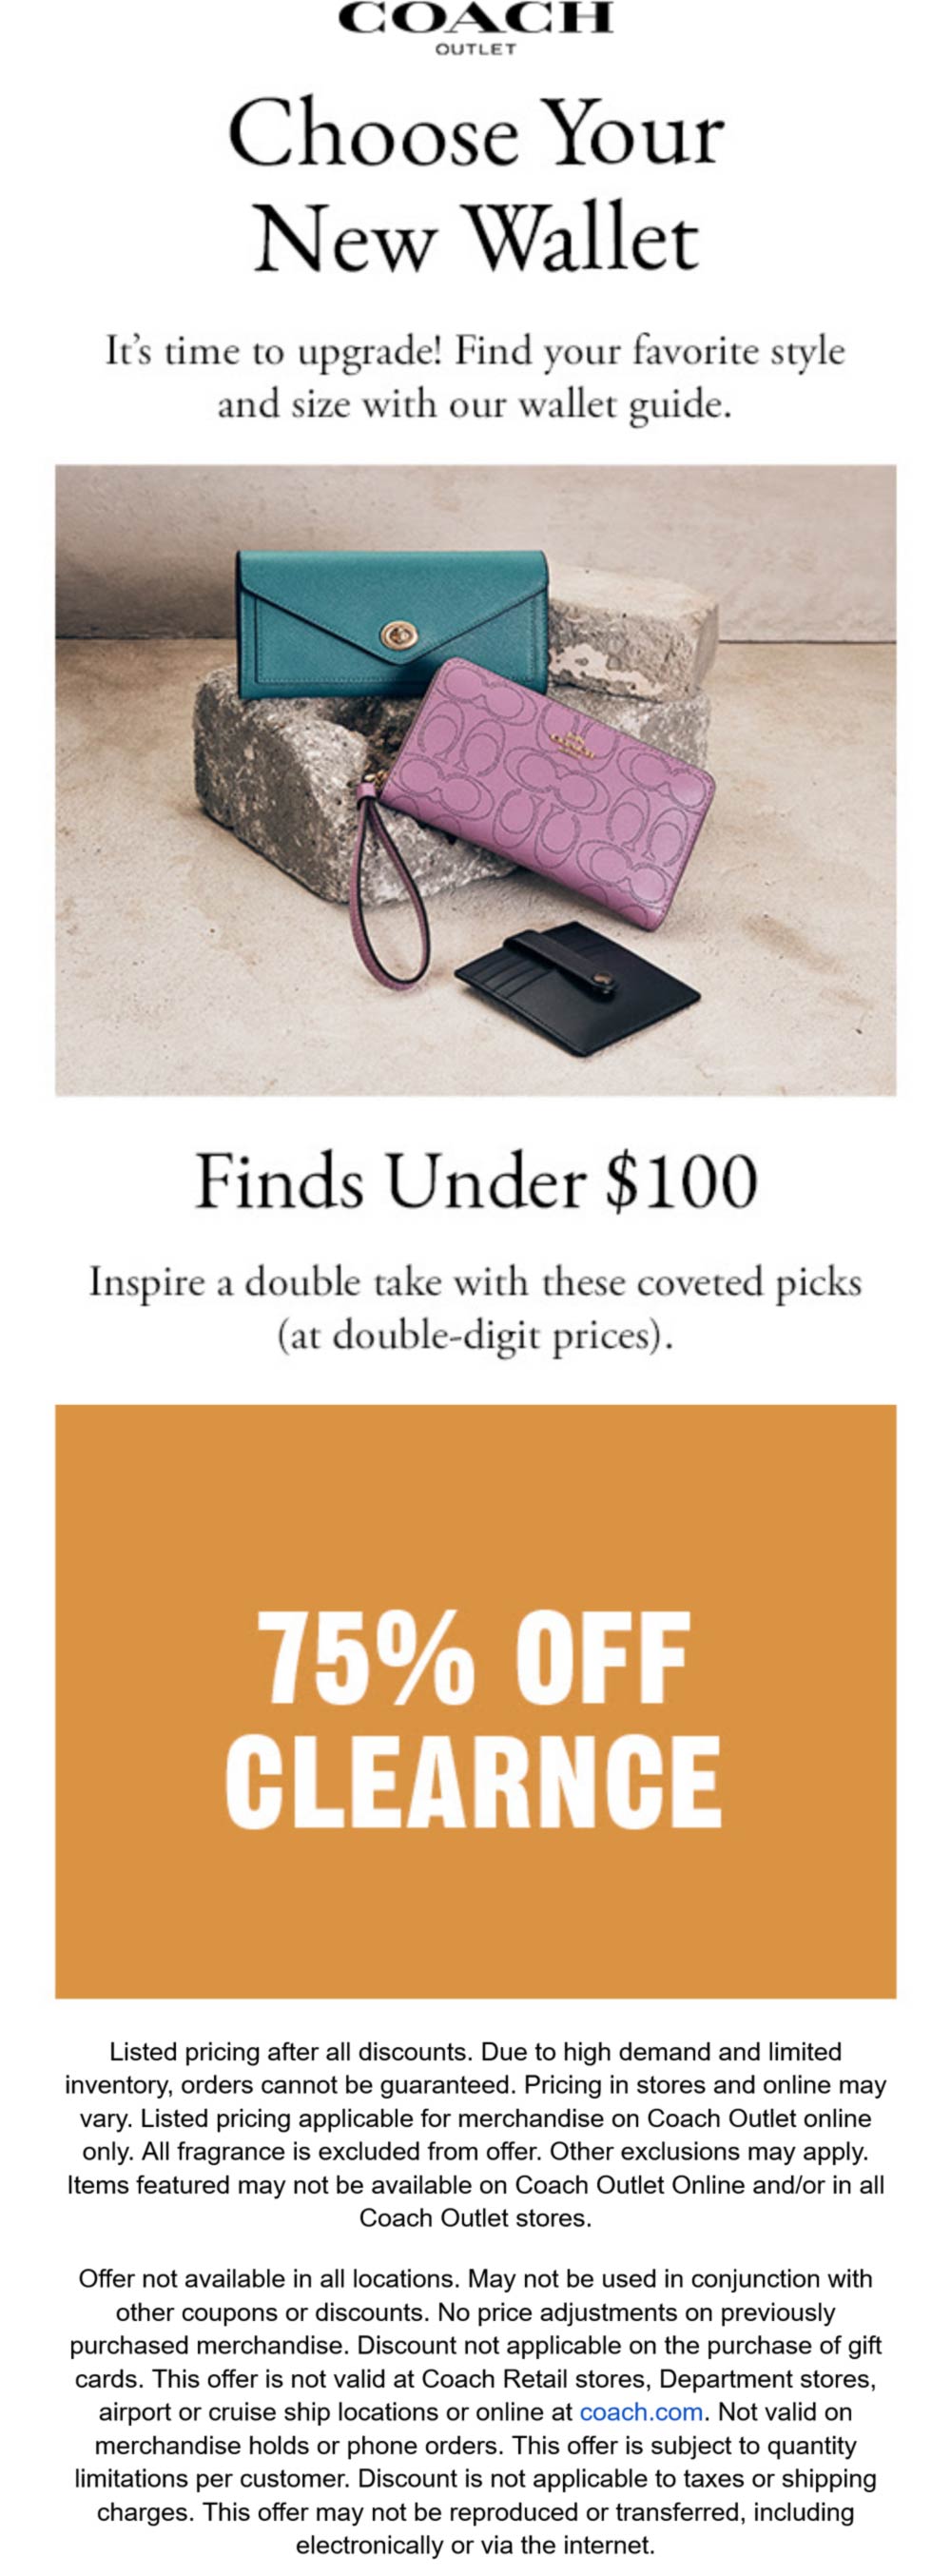 Coach Outlet stores Coupon  75% off clearance at Coach Outlet #coachoutlet 